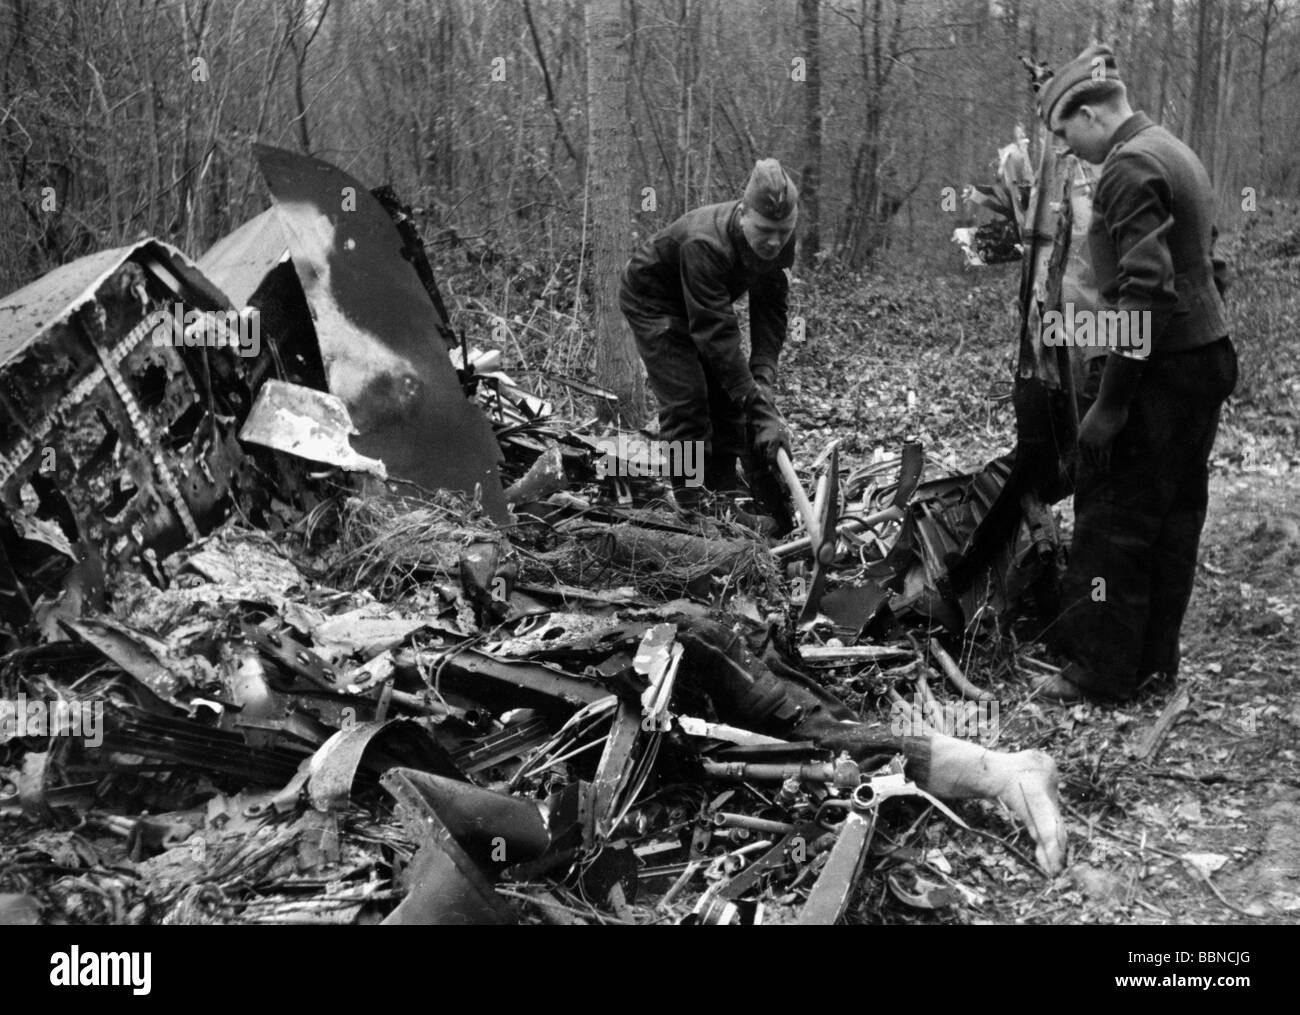 events, Second World War / WWII, aerial warfare, France 1942 / 1943, British bomber shot down by a German night fighter near Compiegne, 9.4.1943, German soldiers digging the remains of a crew member out of the wreckage, site of crash, Luftwaffe, Royal Air Force, RAF, losses, dead body, corpse, 20th century, historic, historical, Great Britain, England, bomb war, people, 1940s, Stock Photo